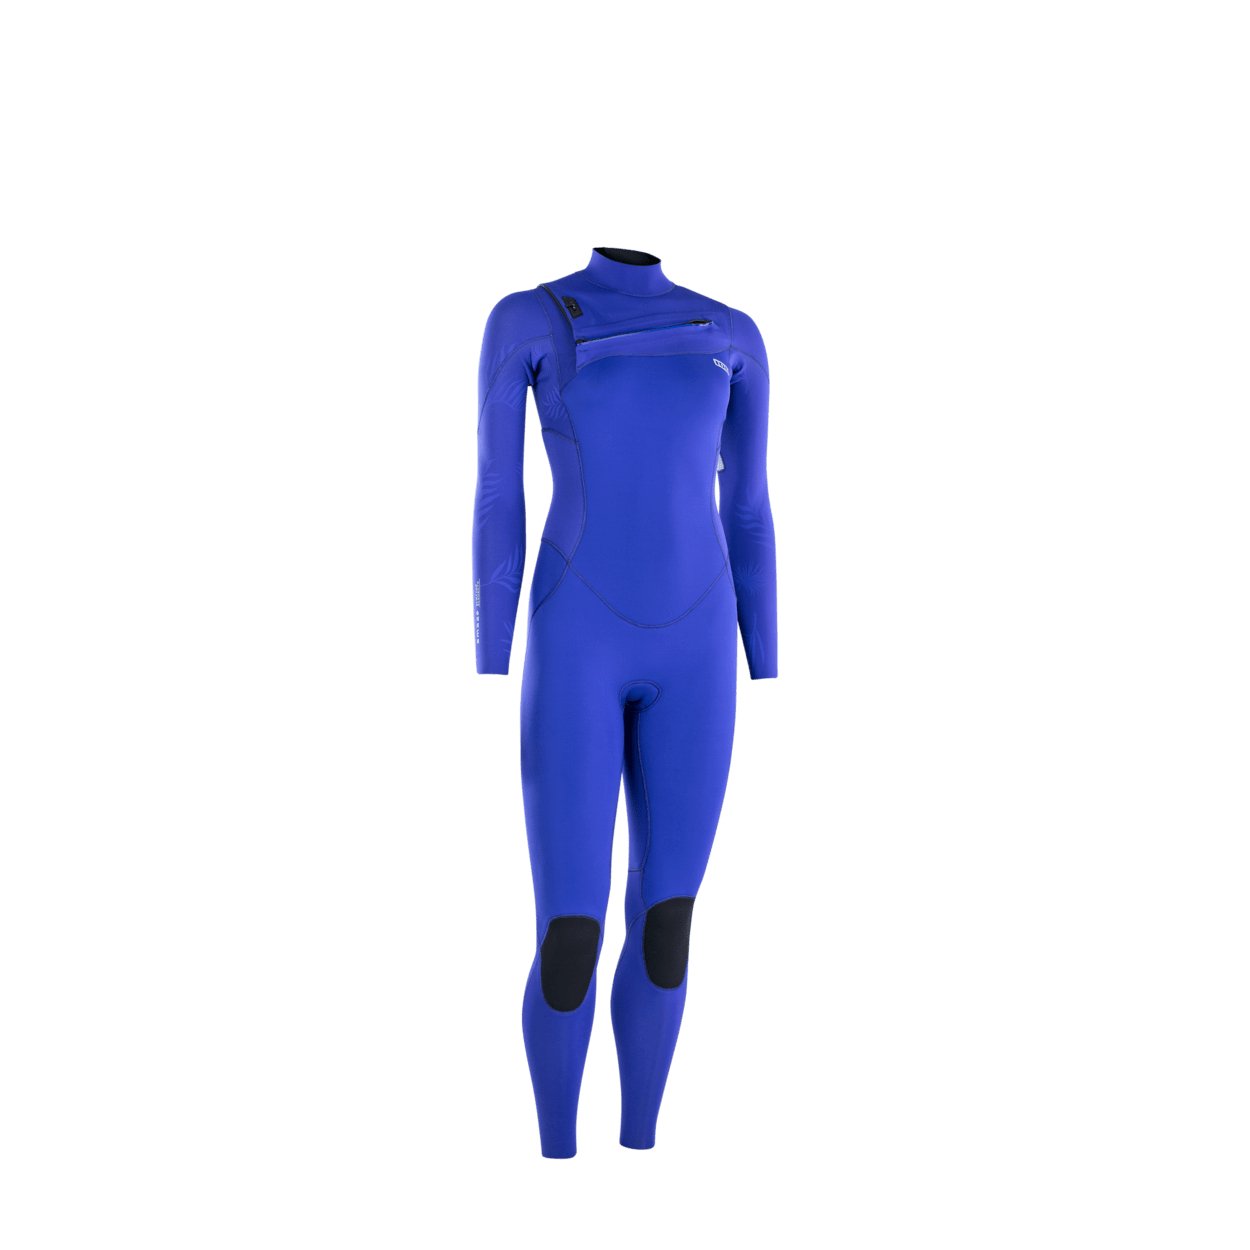 ION Women Wetsuit Amaze Core 4/3 Front Zip 2022 - Worthing Watersports - 9010583058061 - Wetsuits - ION Water